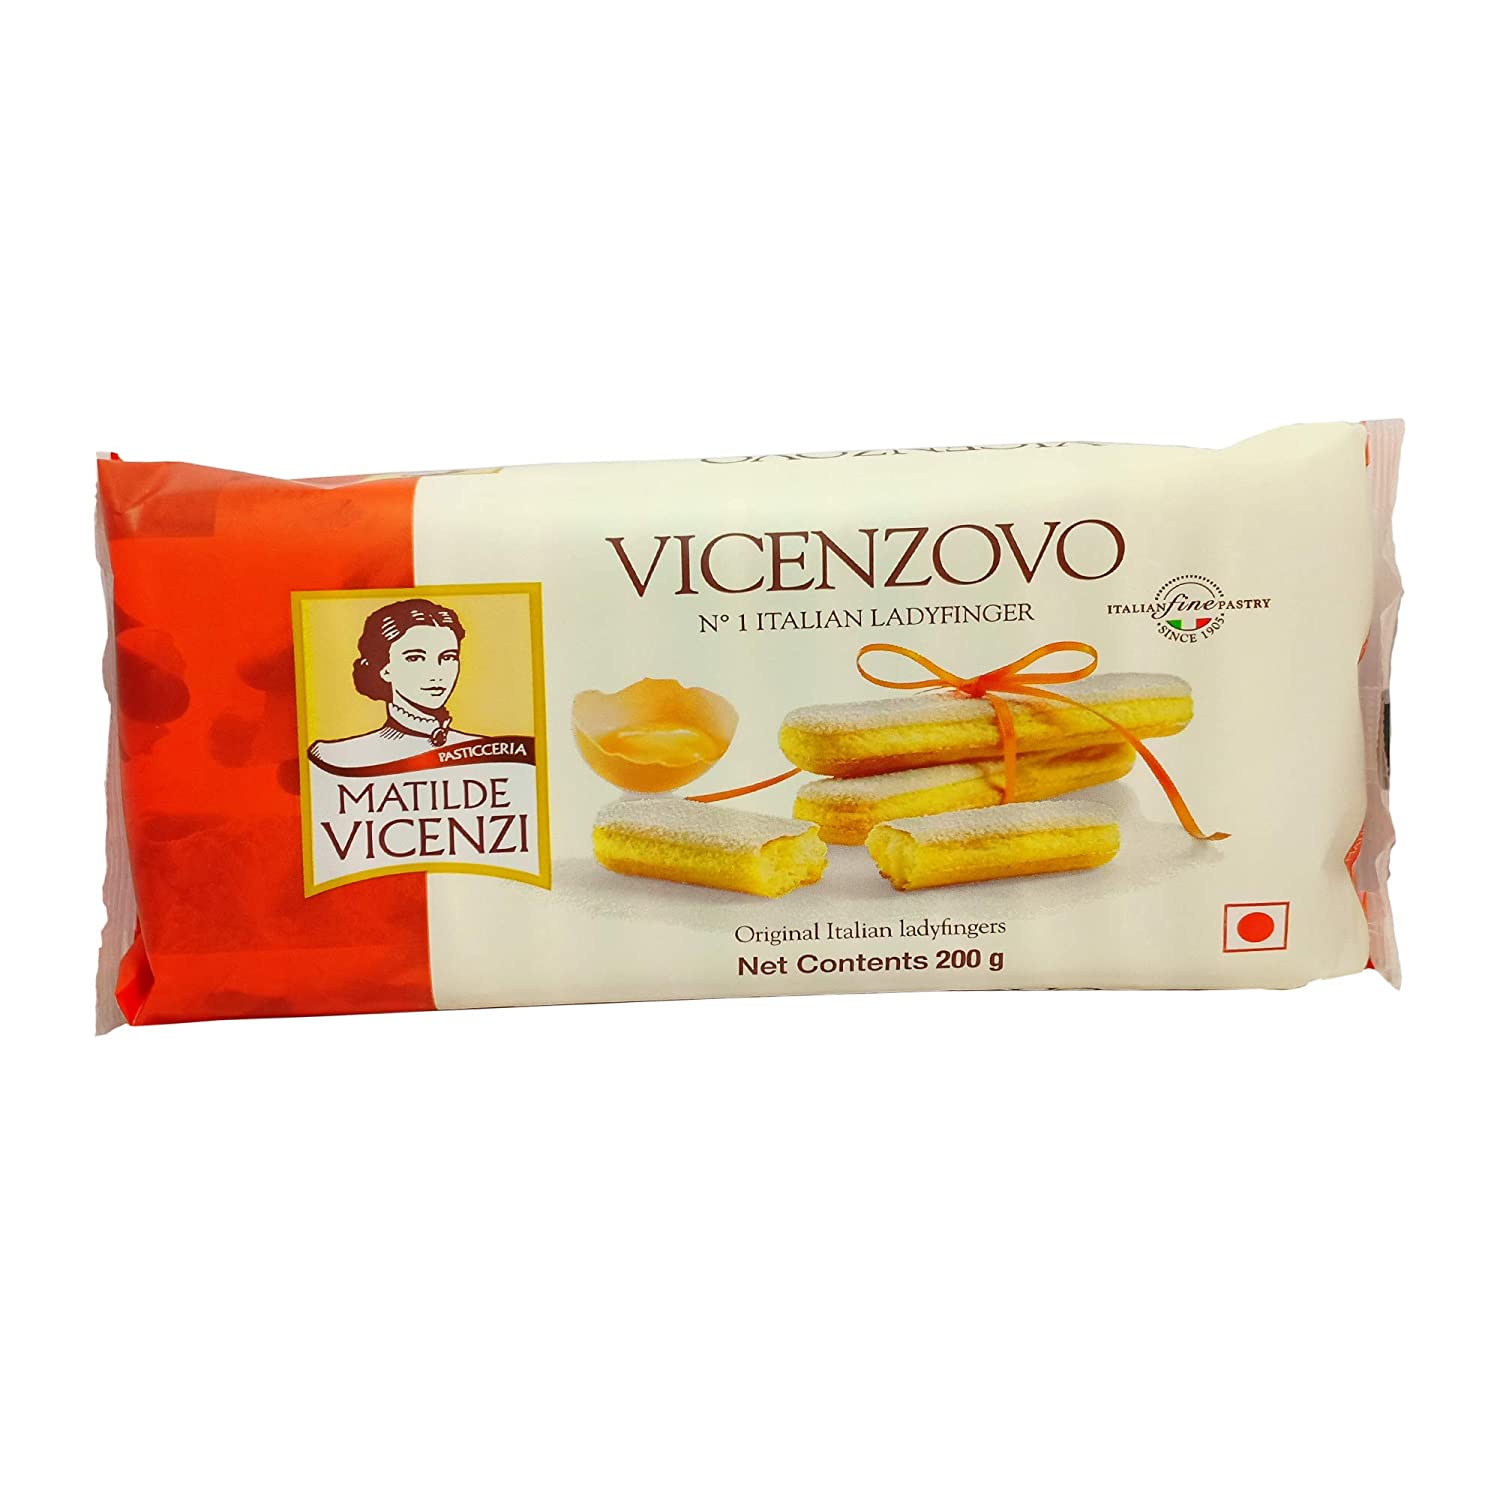 Buy Vicenzovo Ladyfinger Biscuits | All About Baking